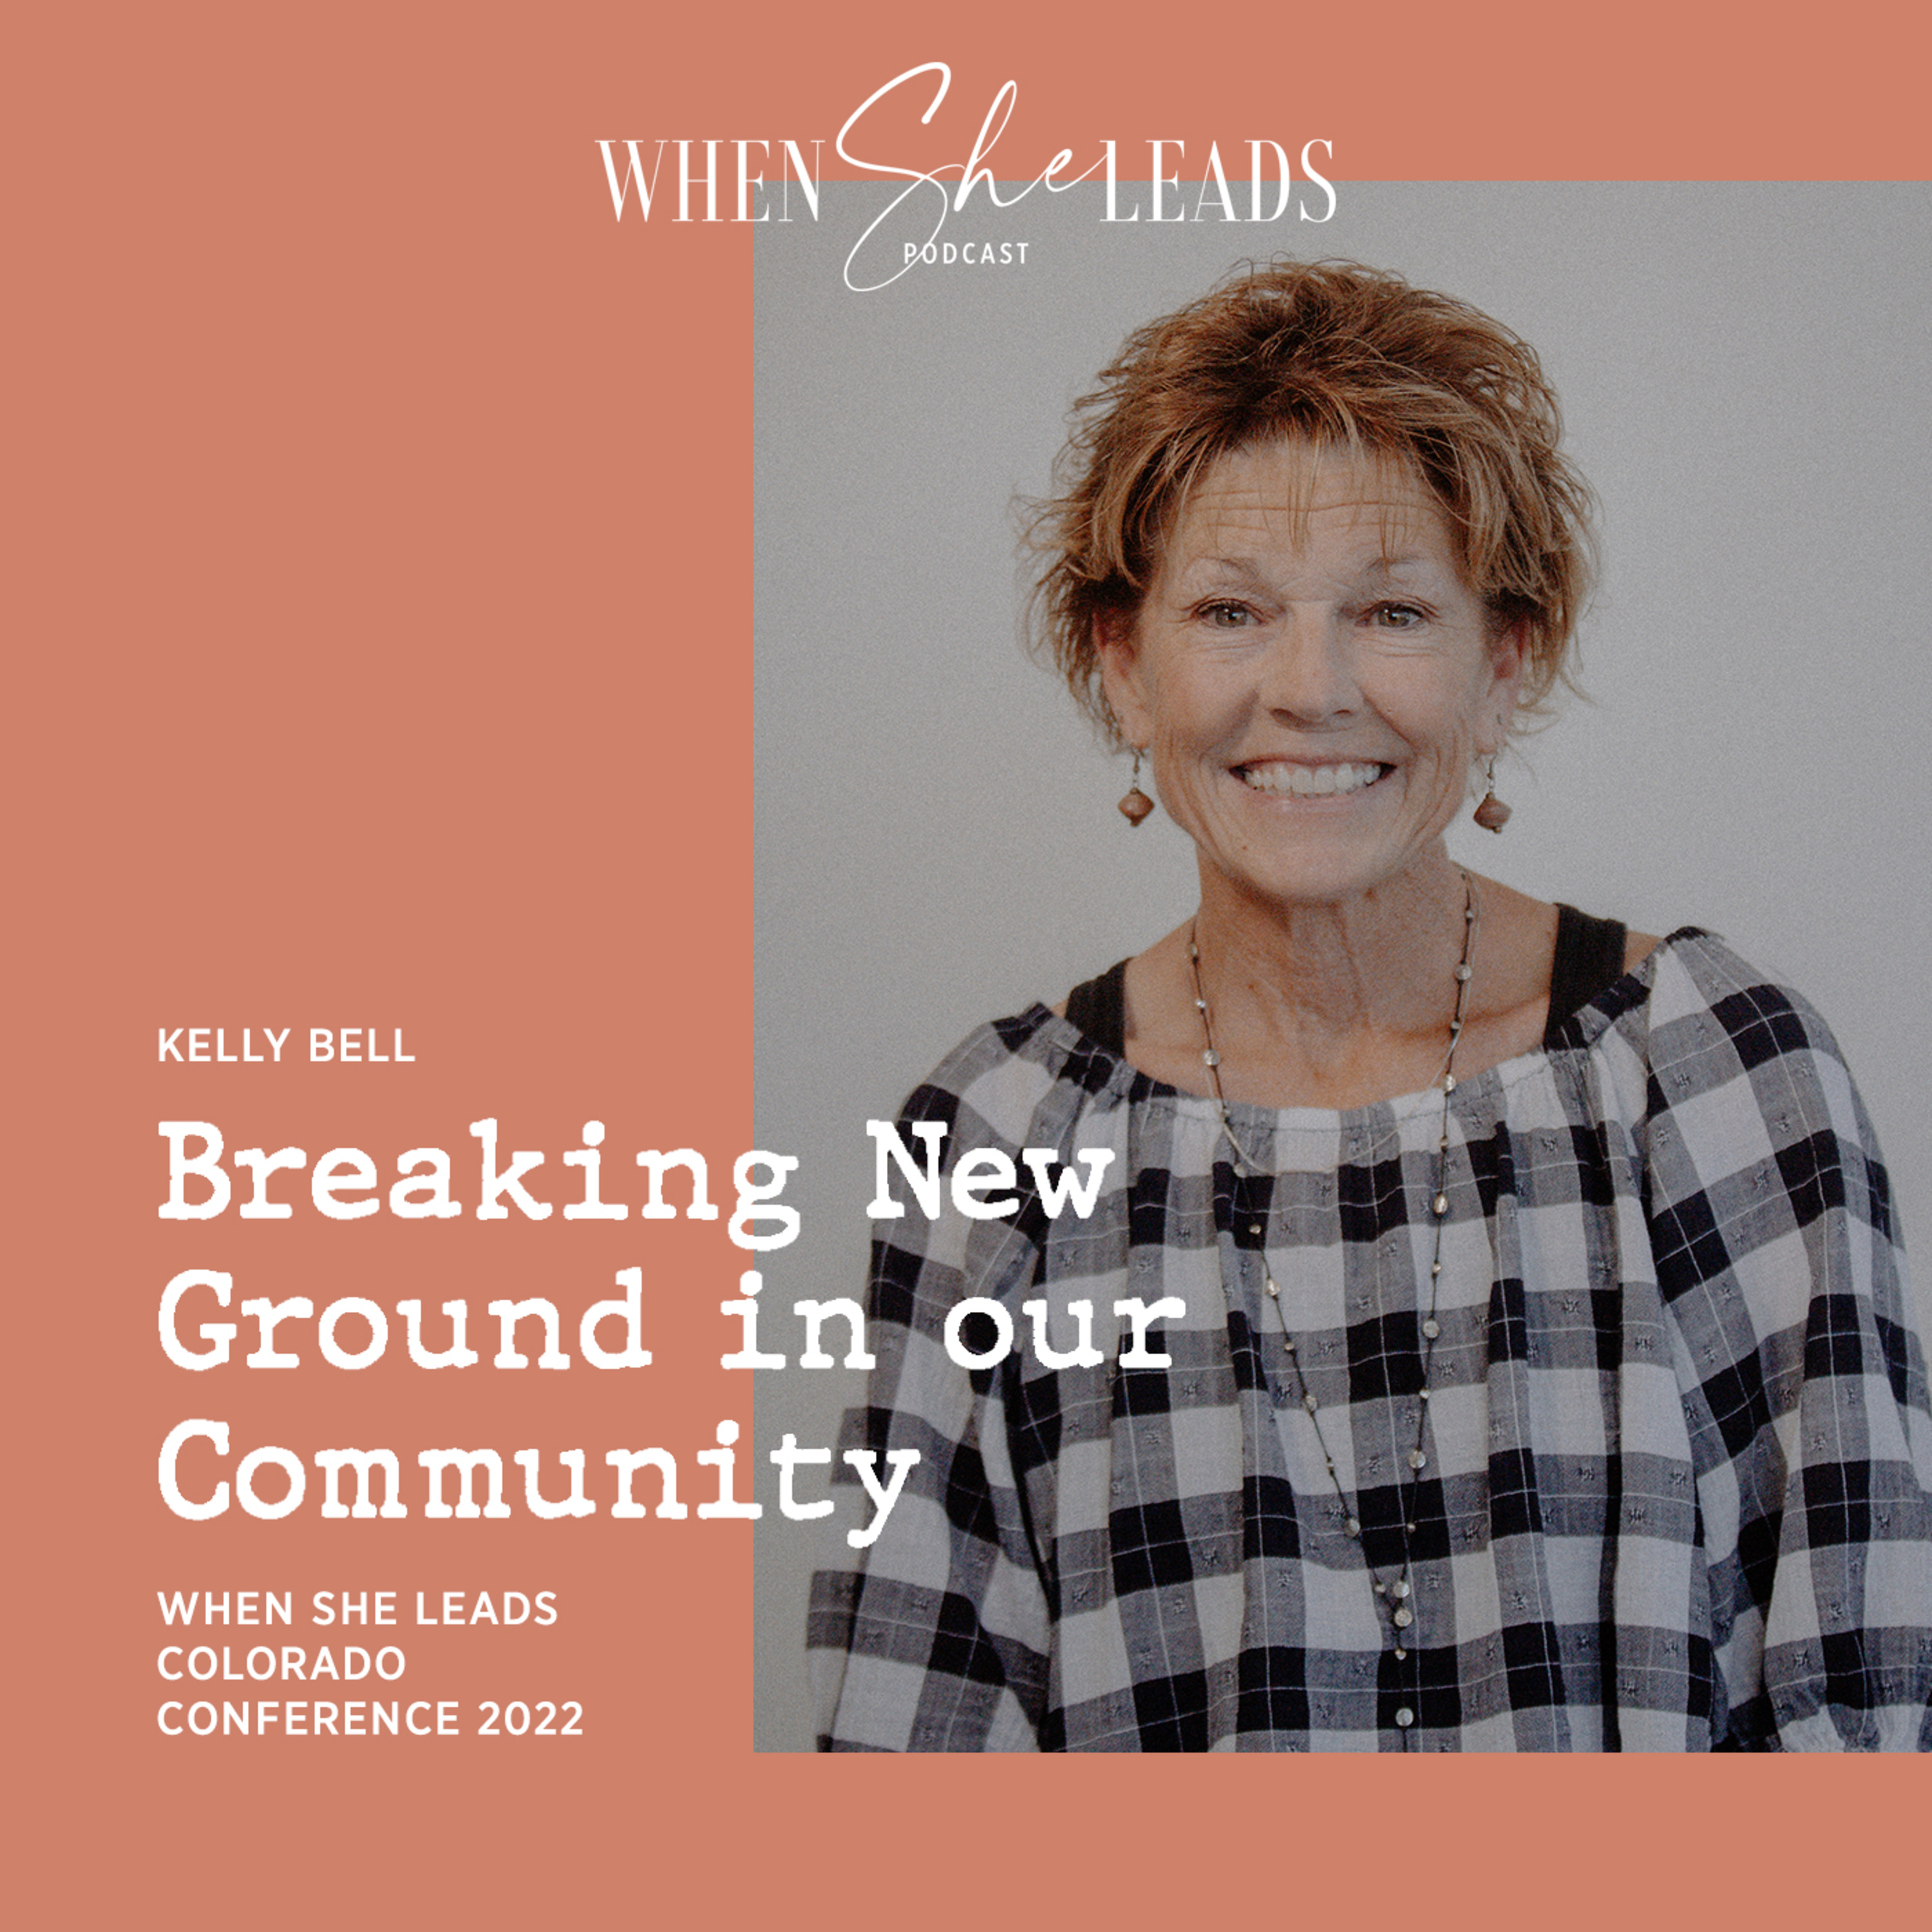 WSL Conference Colorado 2023 – Kelly Bell – Breaking New Ground in our Community